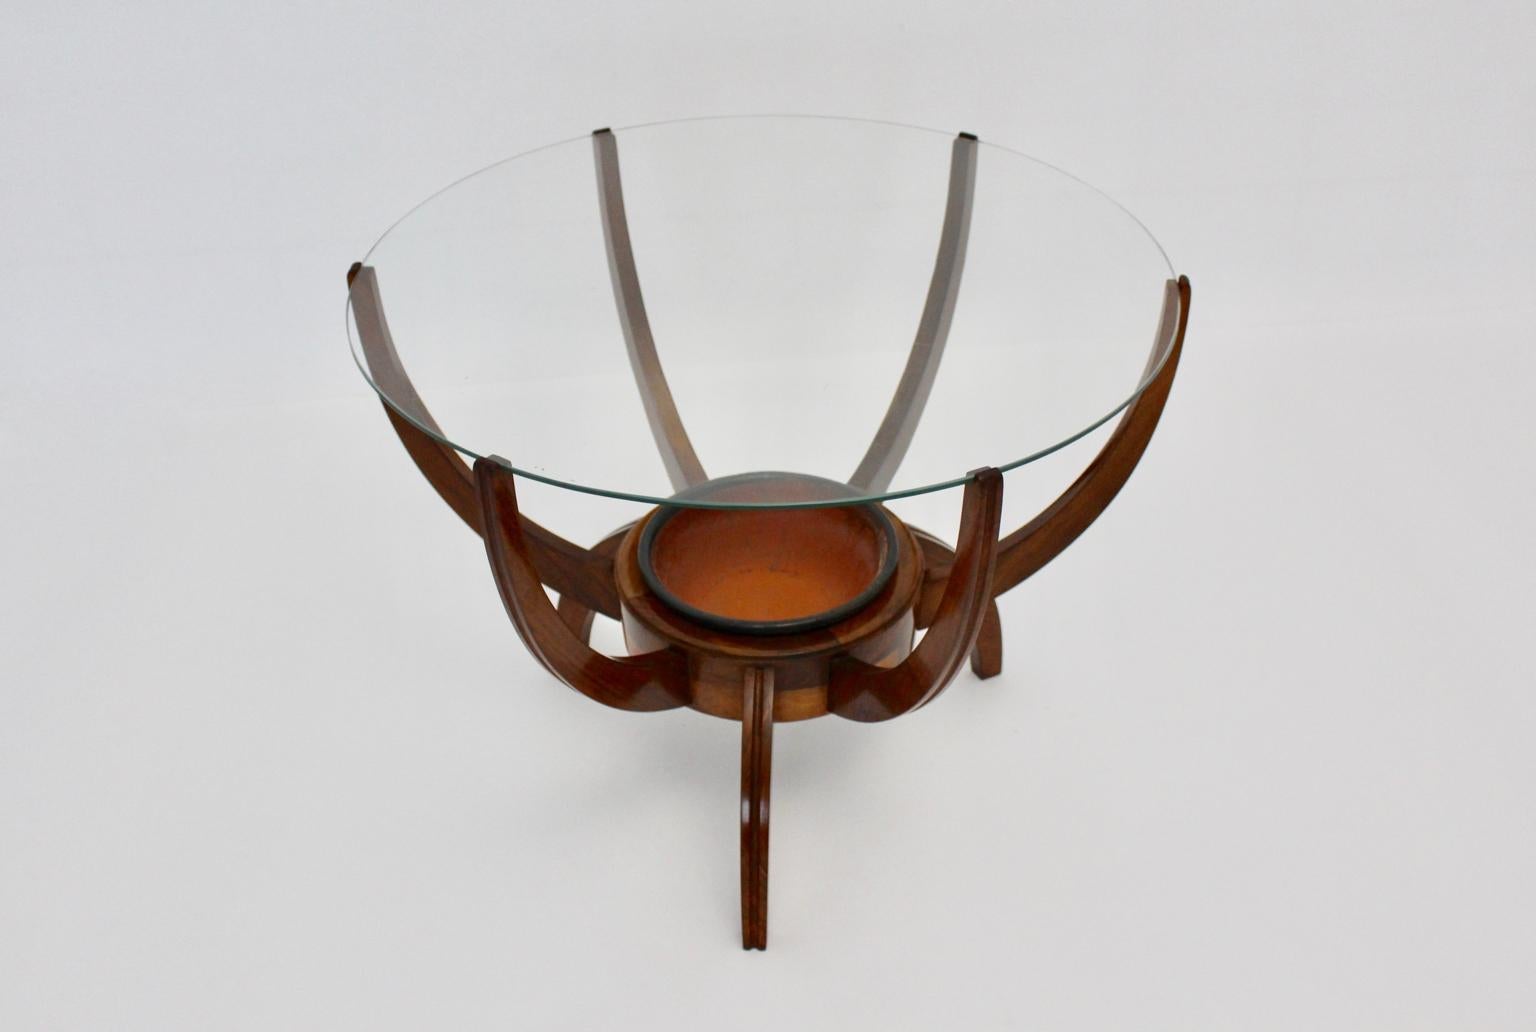 Mid century modern vintage walnut coffee table, which was designed in the style of Carlo di Carli 1950s.
At the center of the base is a ceramic bowl as a removable insert,  which is great to decorate with plants or flowers or for fruits and sweets.